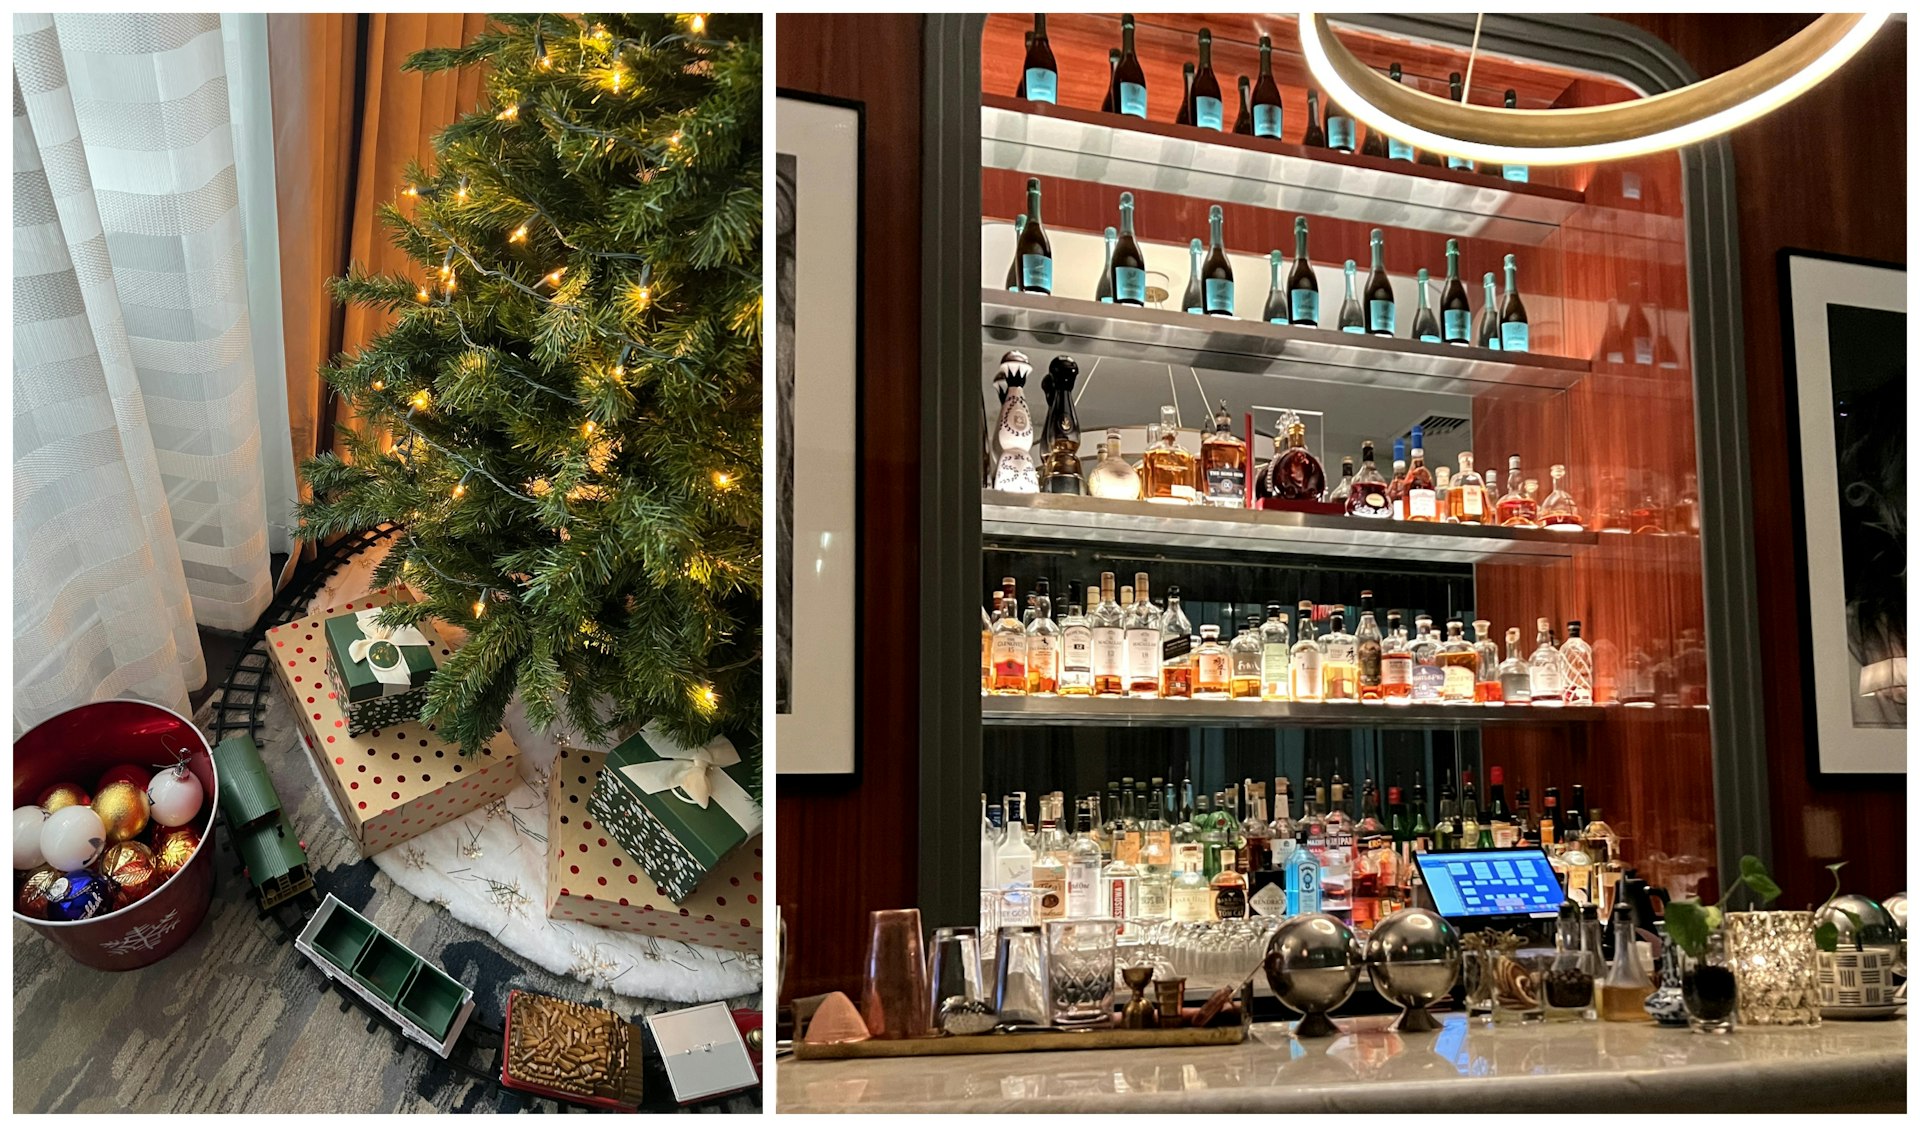 Collage of hotel interior, the left image shows a christmas tree in a bedroom, the right image shows the hotel bar